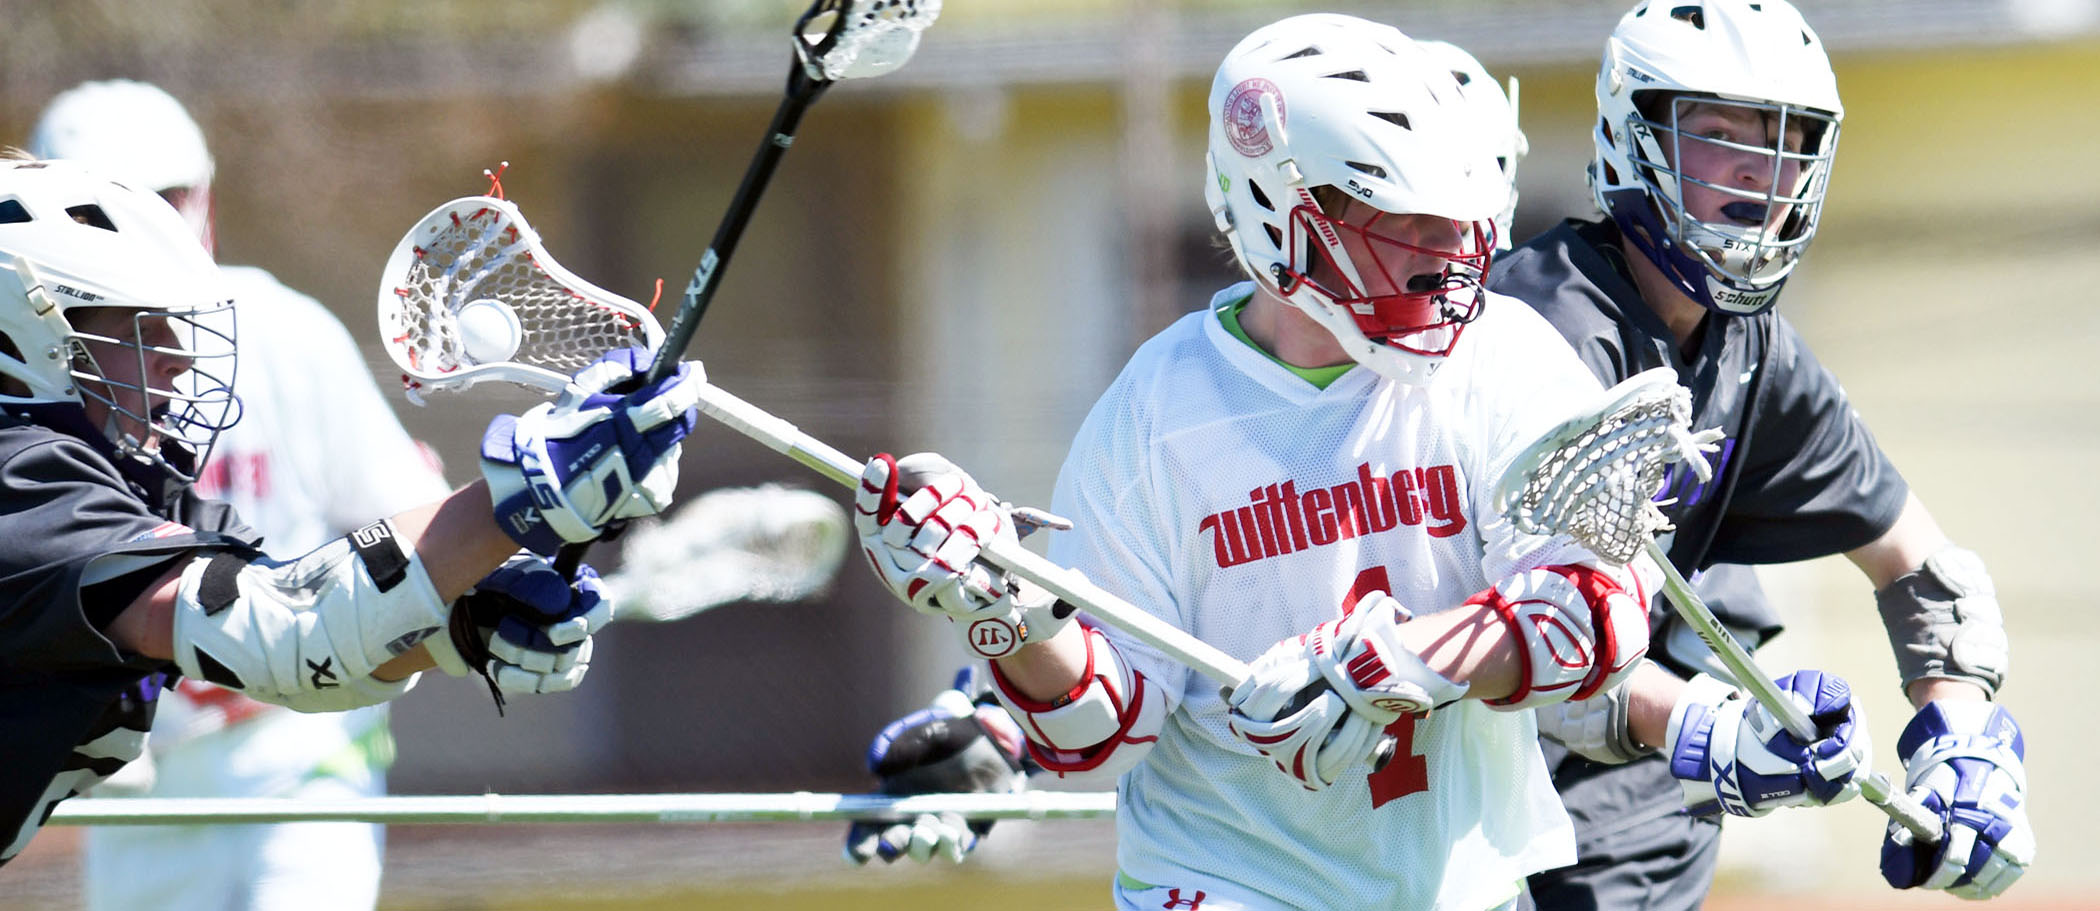 Wittenberg Powers Past Wooster on the Road, 13-7